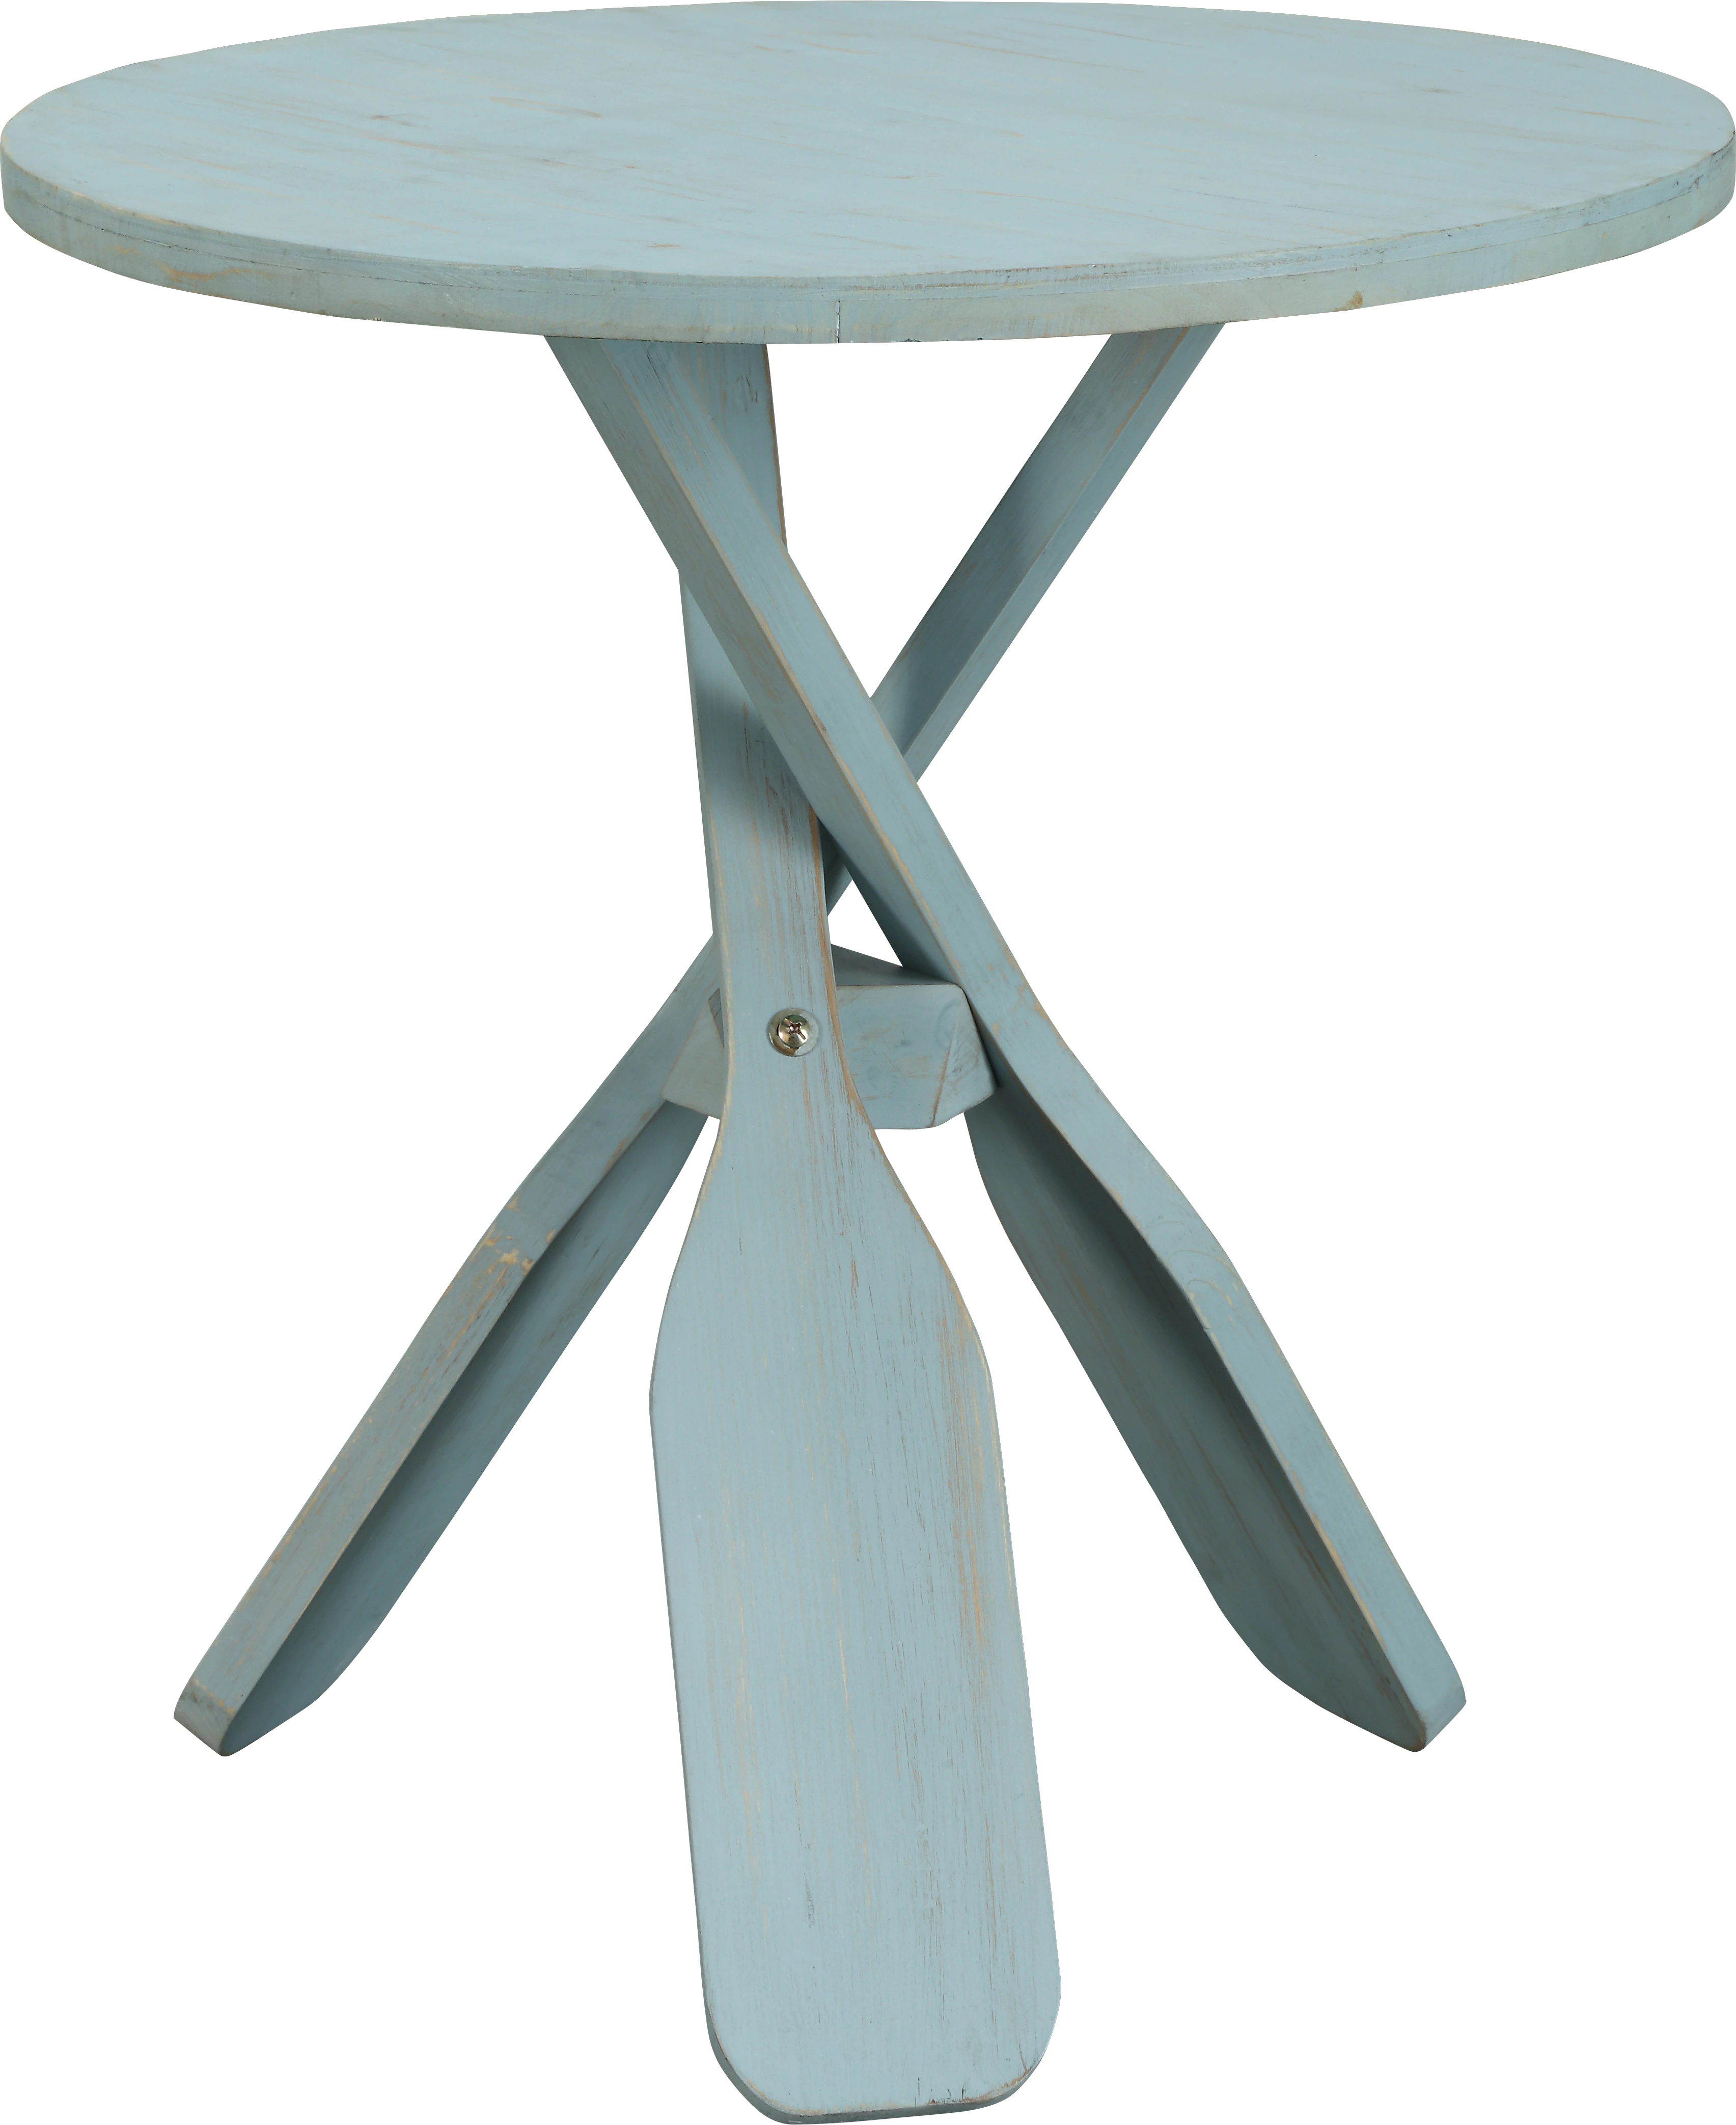 triple paddle blue accent table tables colors triplepaddle teal white drop leaf pendant lighting outdoor side cover ikea storage curtains target hammered metal coffee small